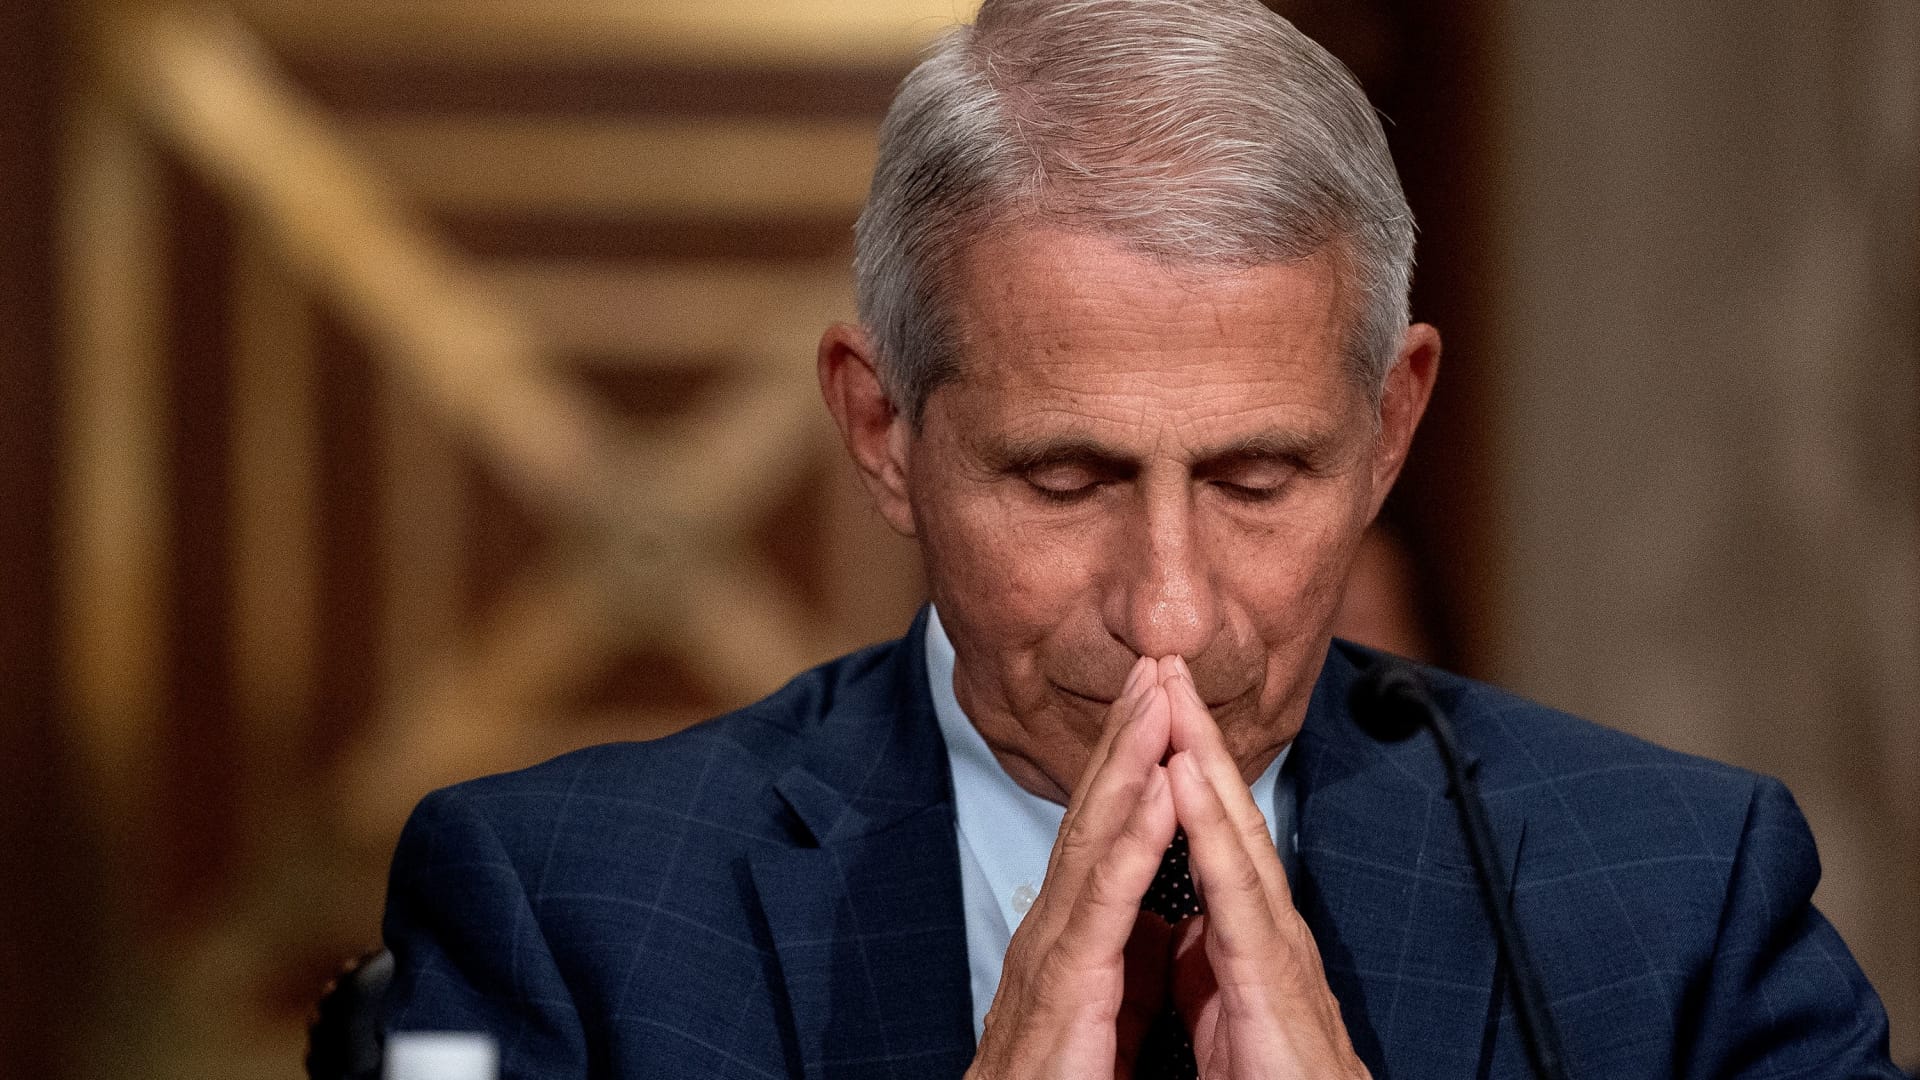 Dr. Anthony Fauci, director of the National Institute of Allergy and Infectious Diseases, listens during a Senate Health, Education, Labor, and Pensions Committee hearing at the Dirksen Senate Office Building in Washington, D.C., U.S., July 20, 2021.